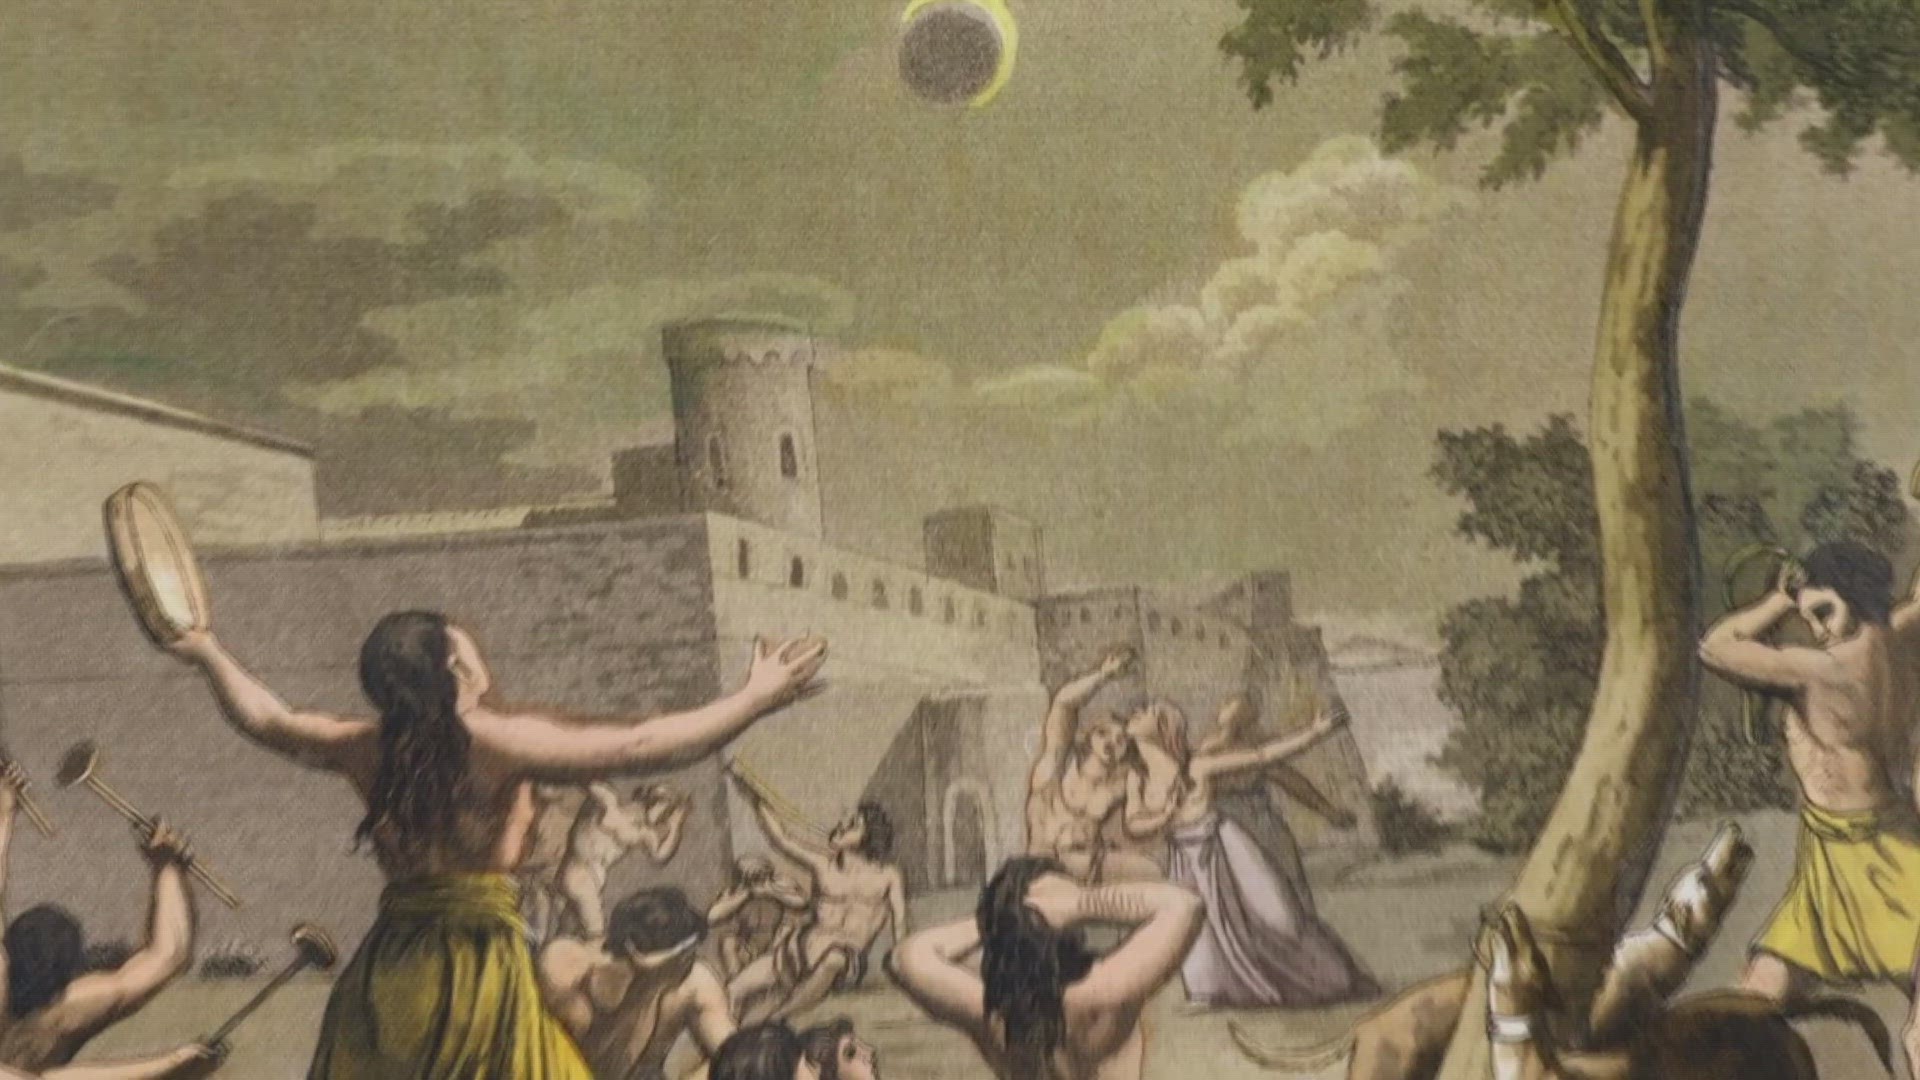 Here's what people thought of solar eclipses thousands of years ago, and what history tells us about planet Earth.